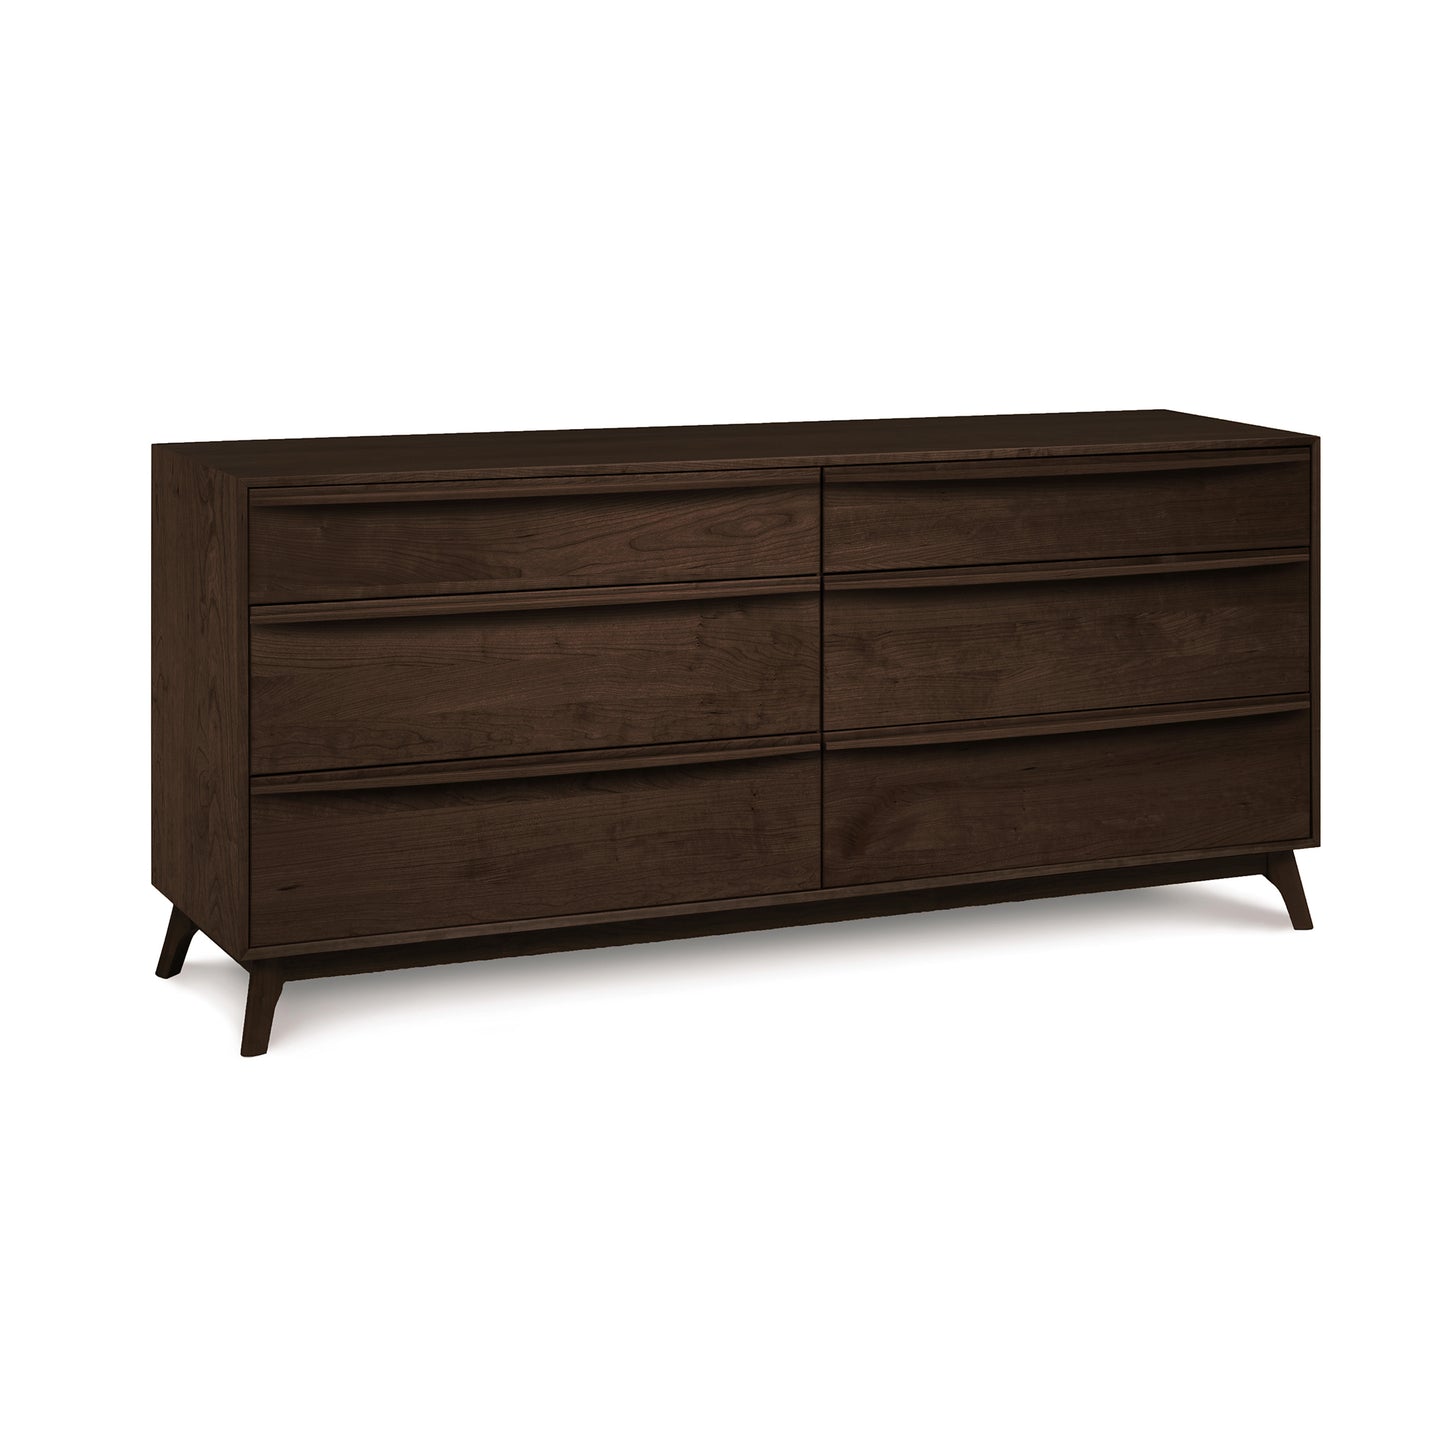 A solid natural hardwood Copeland Furniture Catalina 6-Drawer Dresser with angled legs.